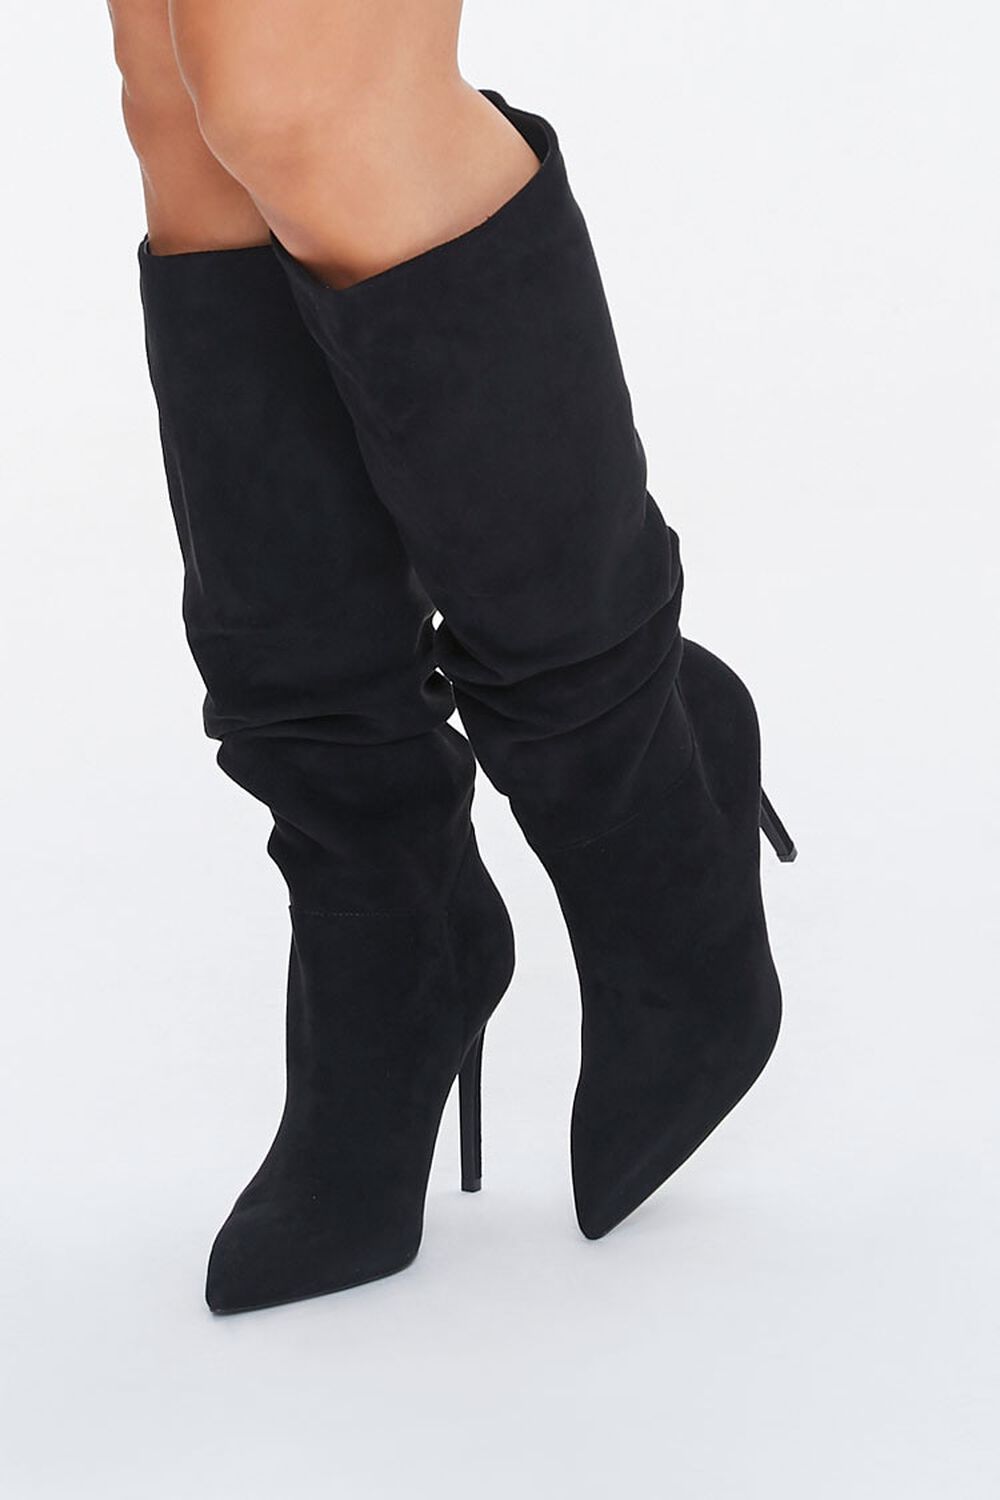 BLACK Slouchy Stiletto Knee-High Boots, image 1